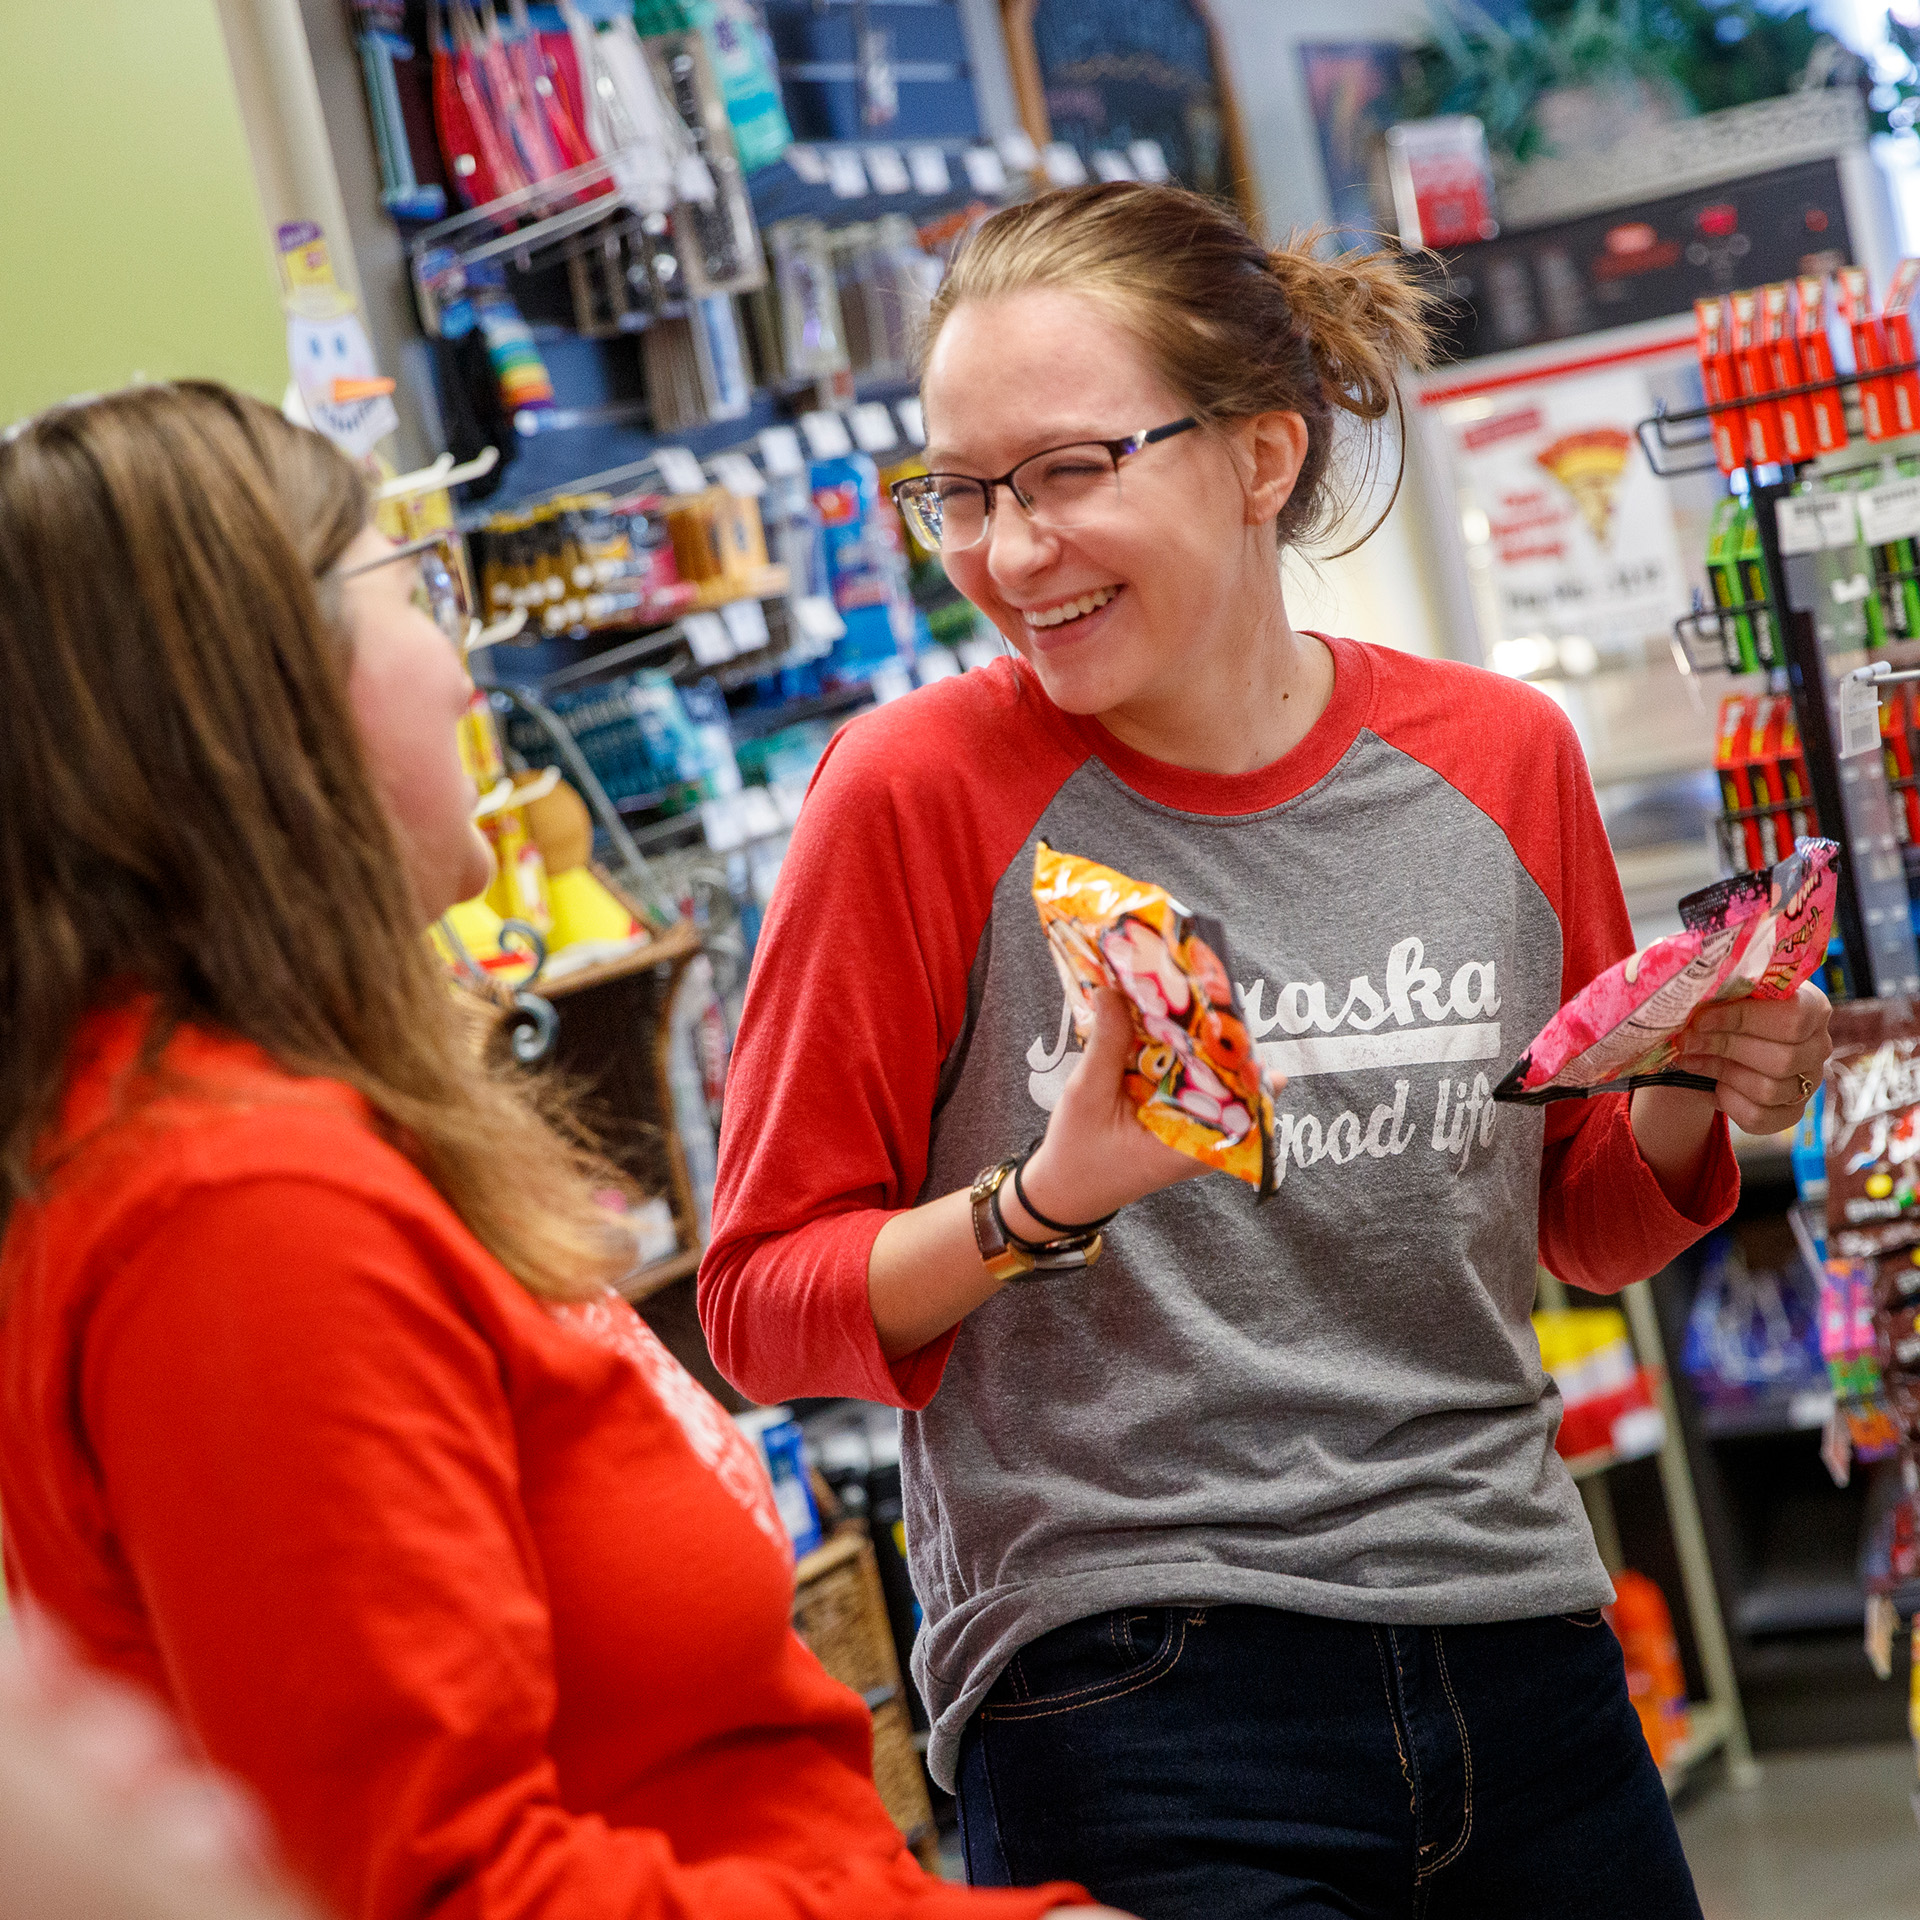 Students discuss snack options in the Herbie's Market at Village location